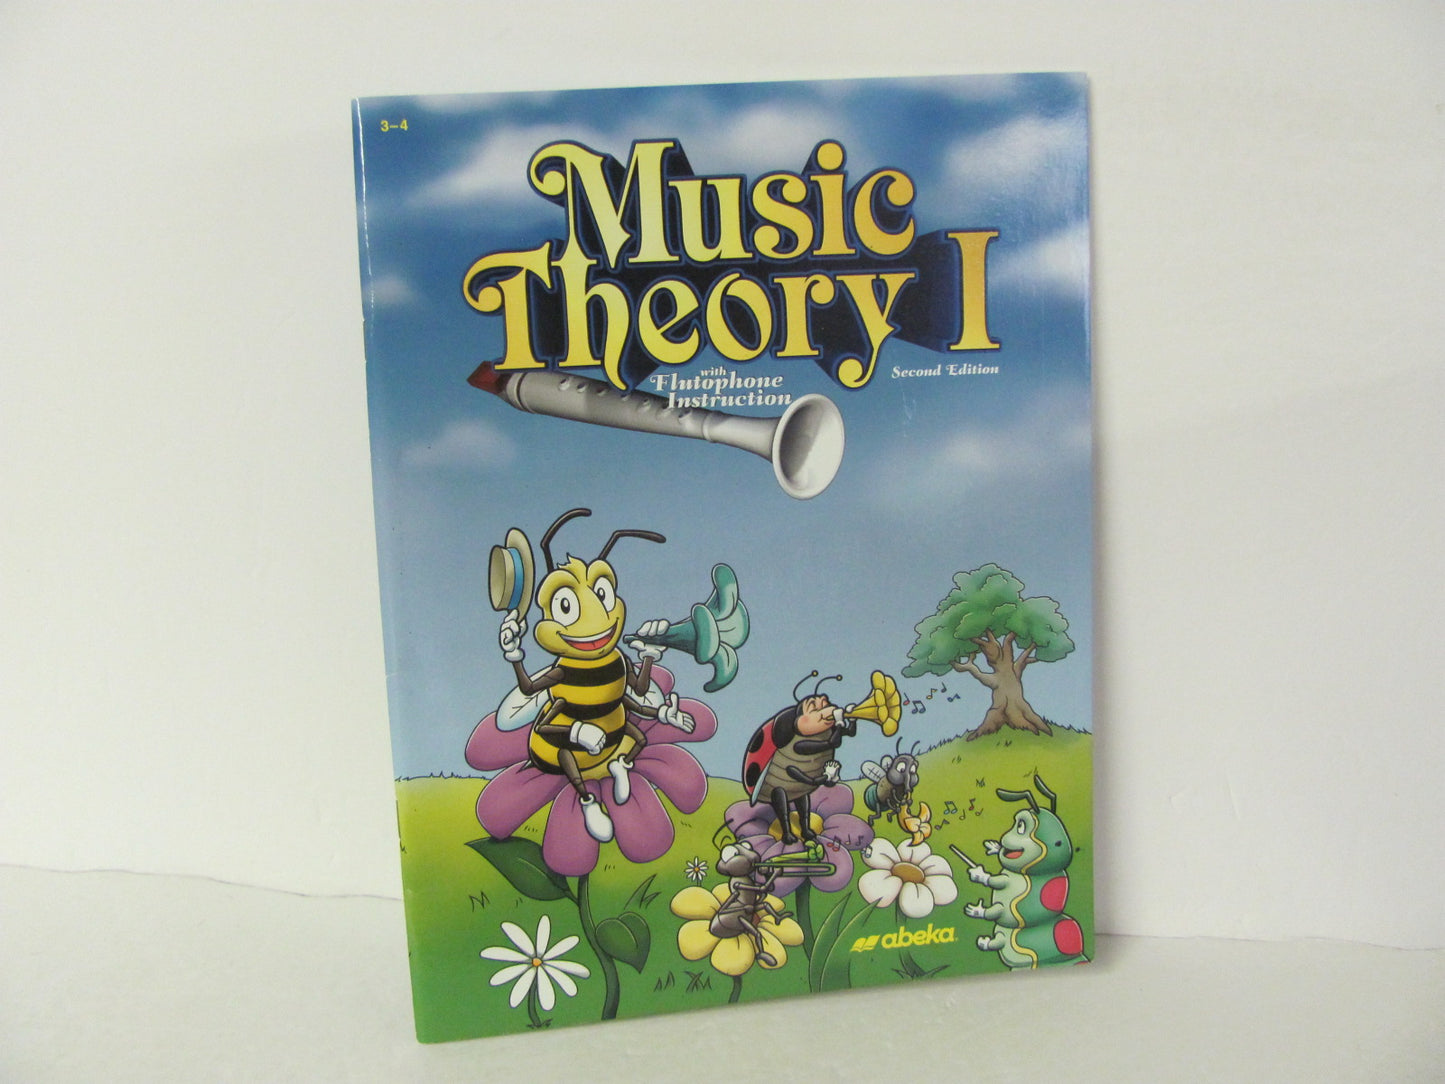 Music Theory I Abeka Student Book Pre-Owned Elementary Music Education Books